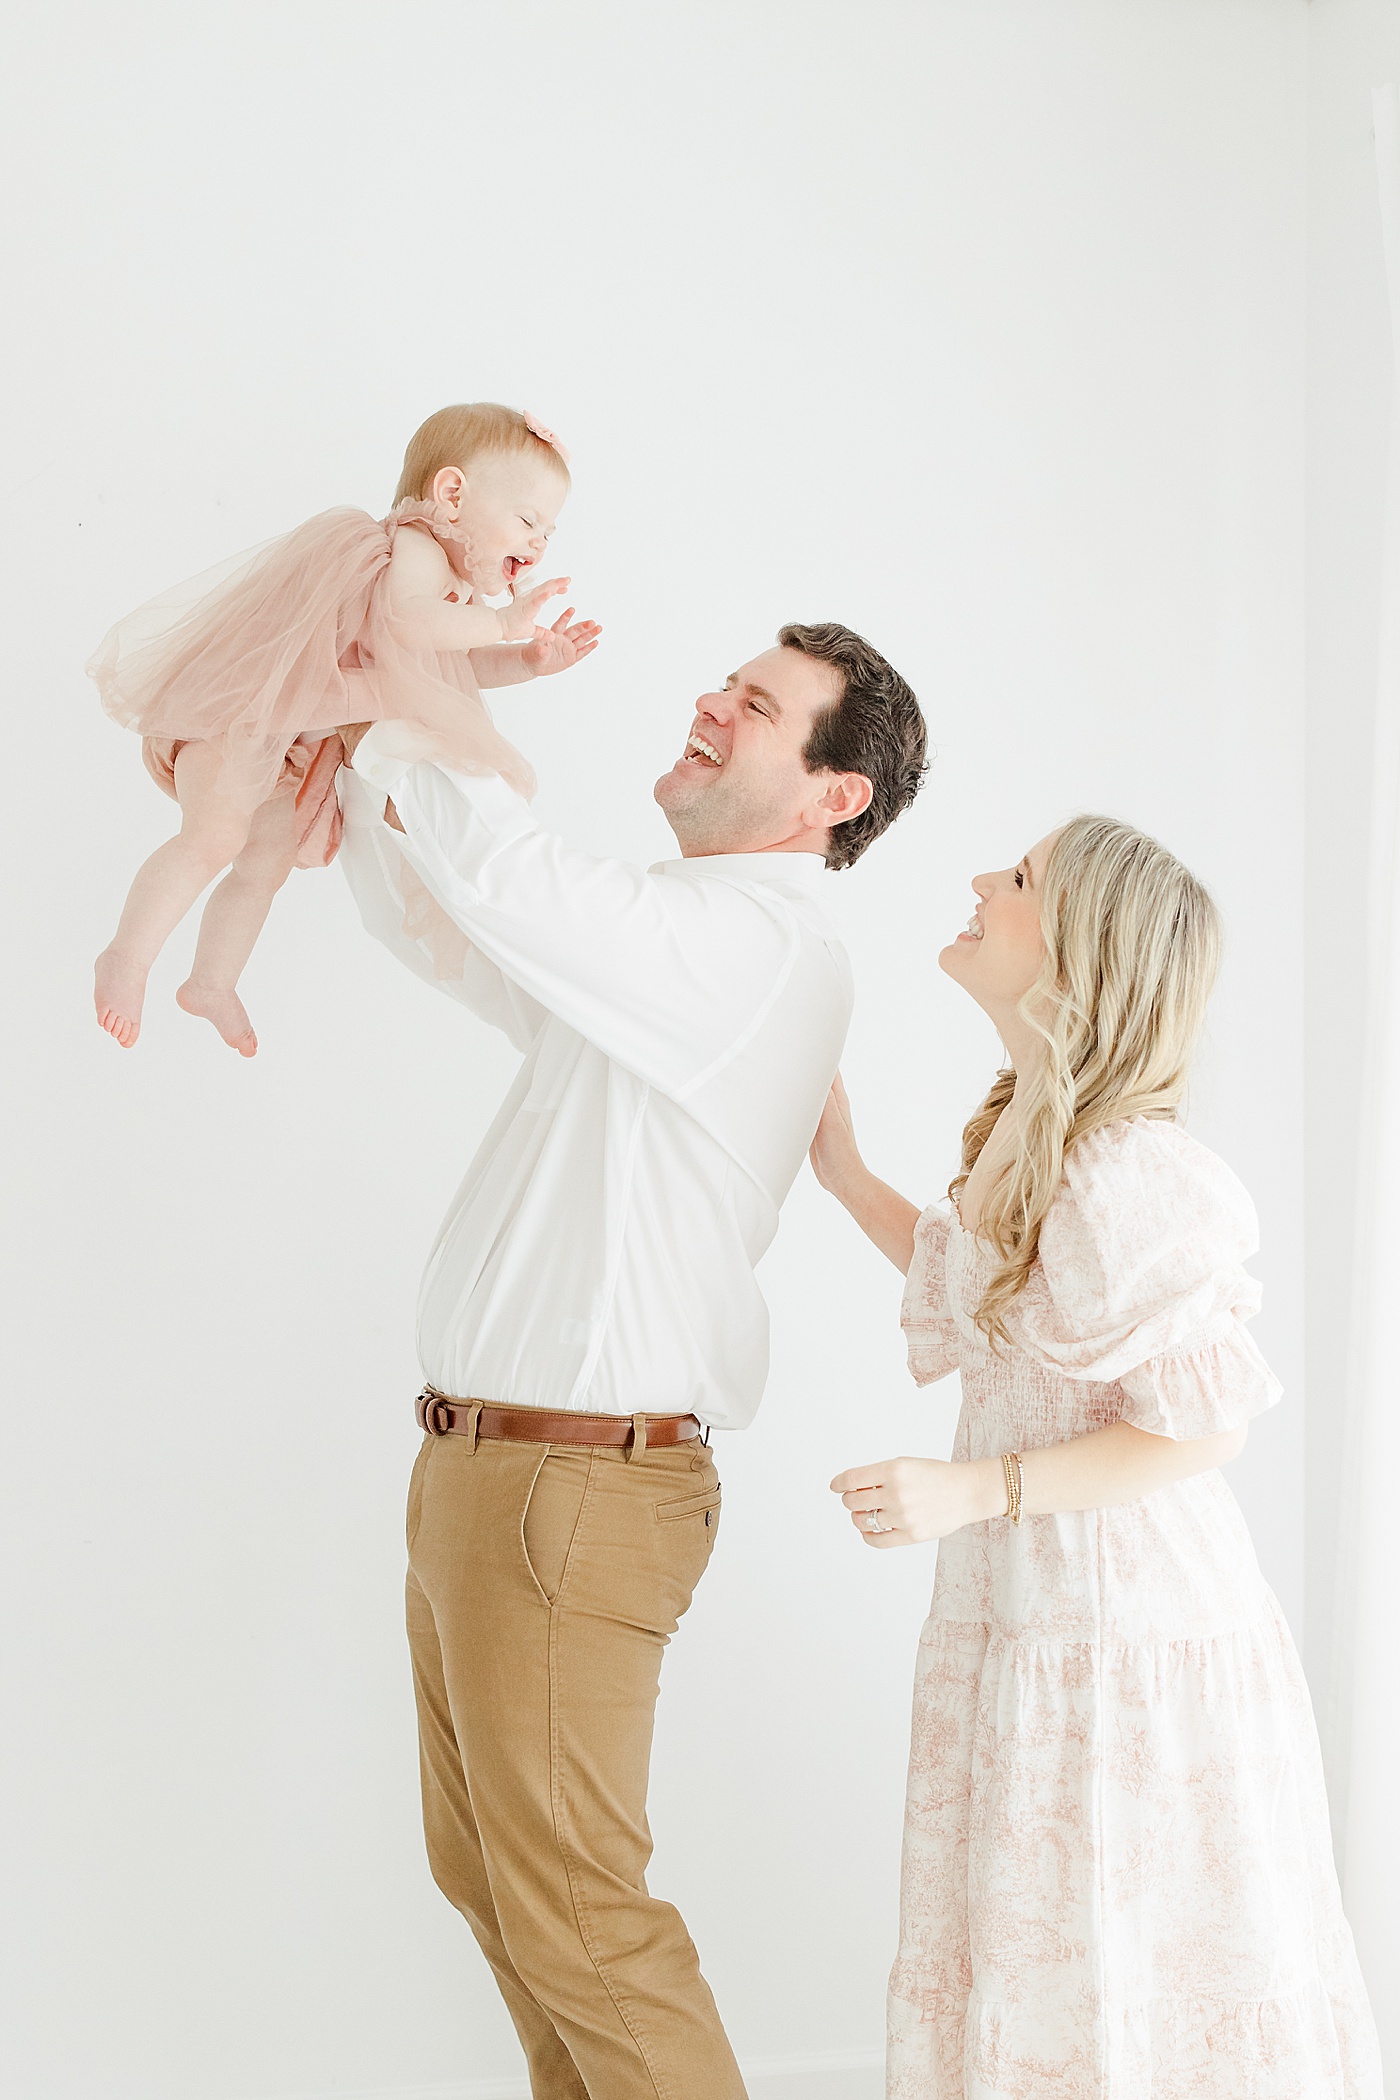 Family portrait during daughters first birthday photoshoot | Kristin Wood Photography